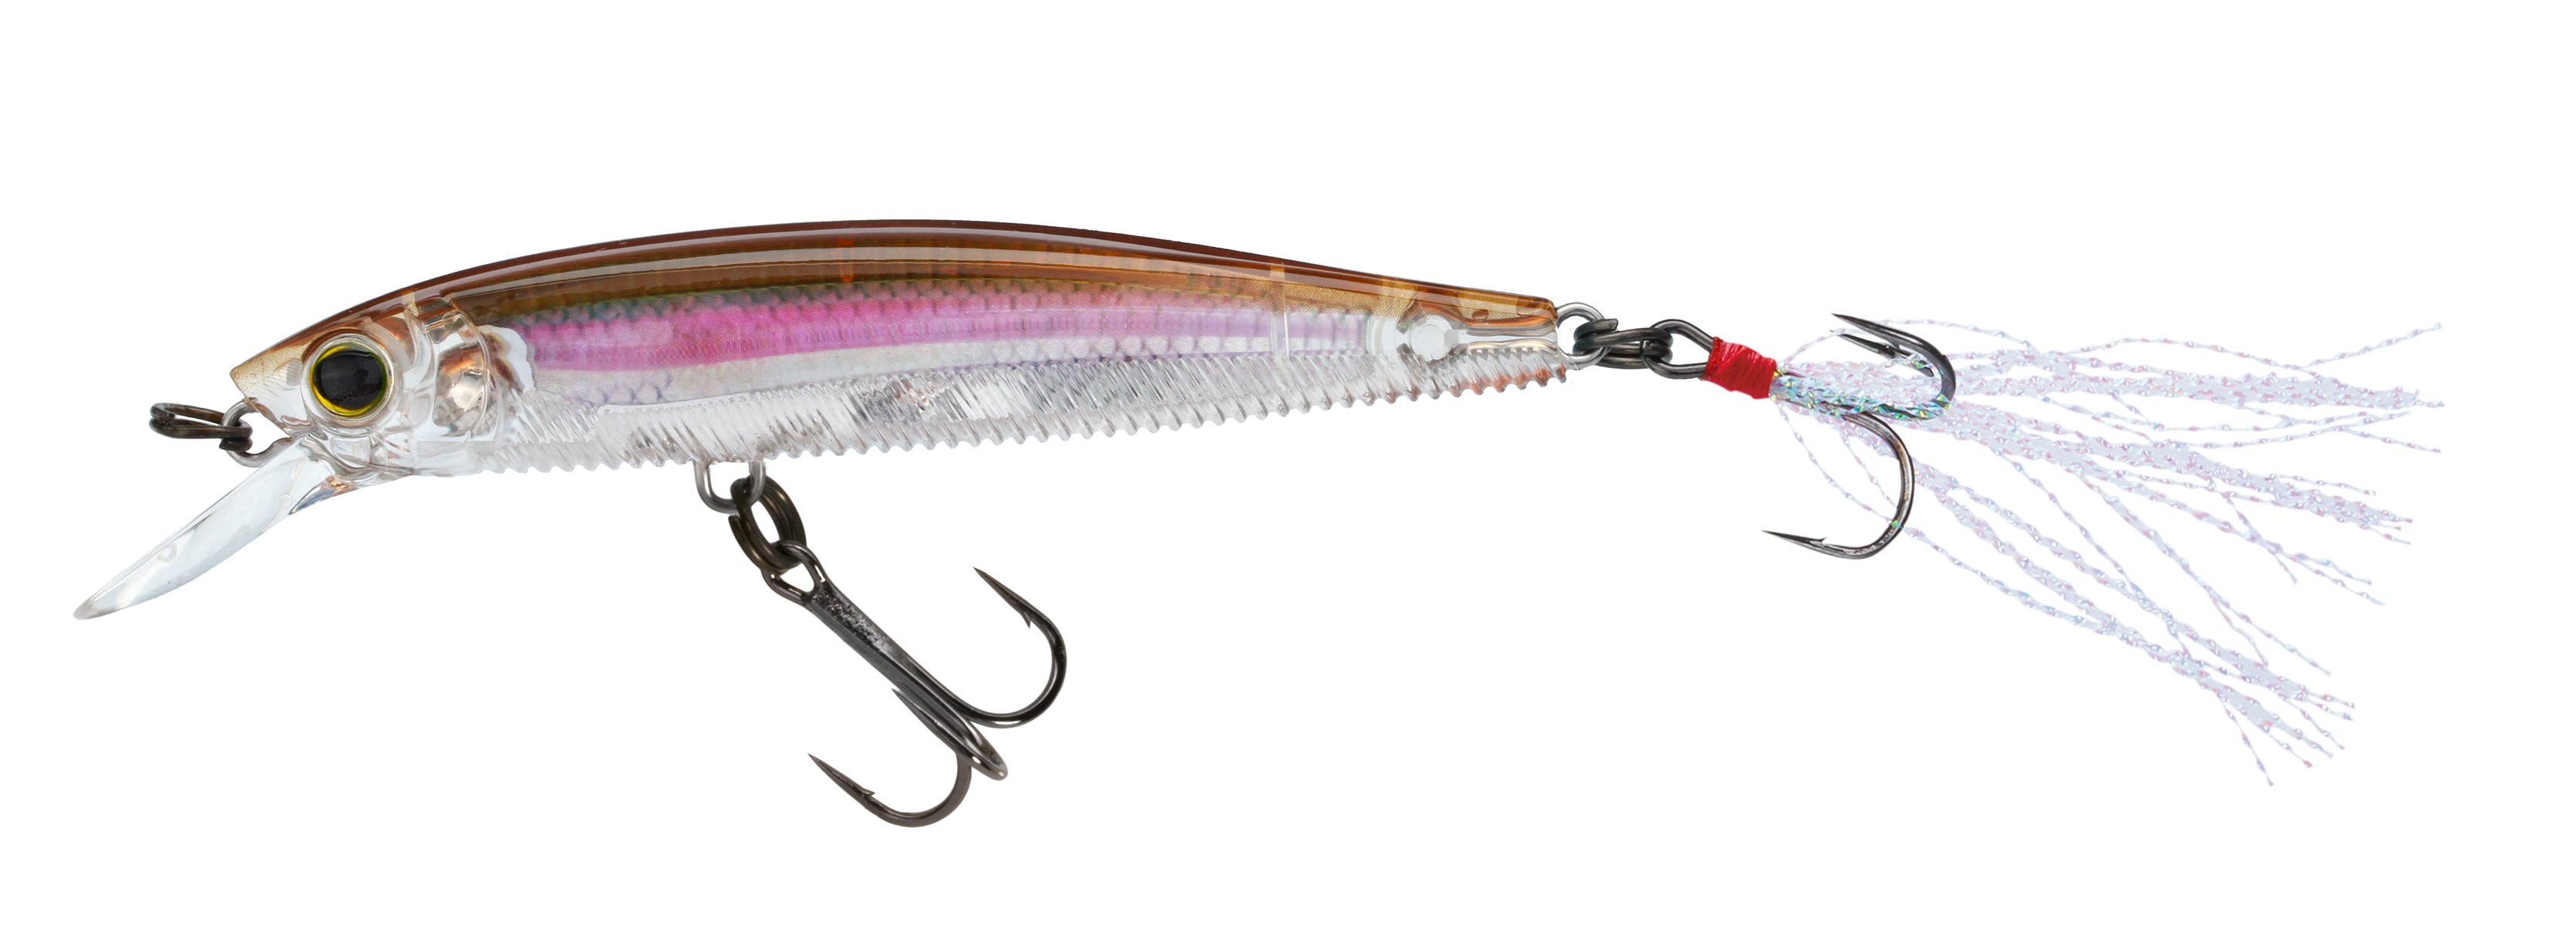 New Trout lures for trolling bass lures Artificial baits 2016 ice